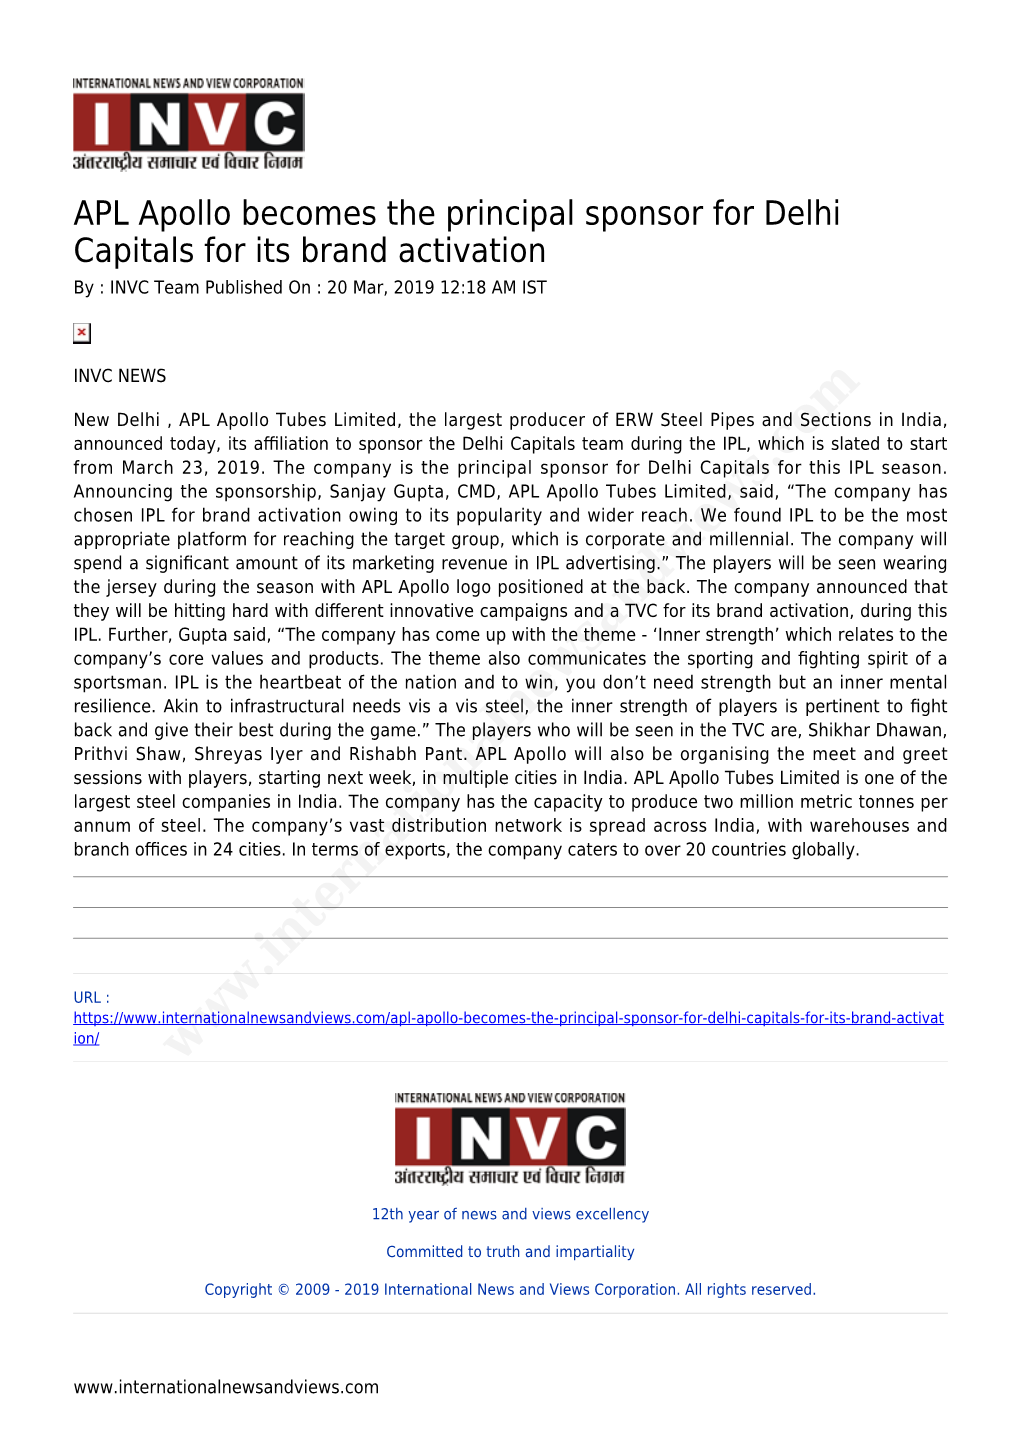 APL Apollo Becomes the Principal Sponsor for Delhi Capitals for Its Brand Activation by : INVC Team Published on : 20 Mar, 2019 12:18 AM IST